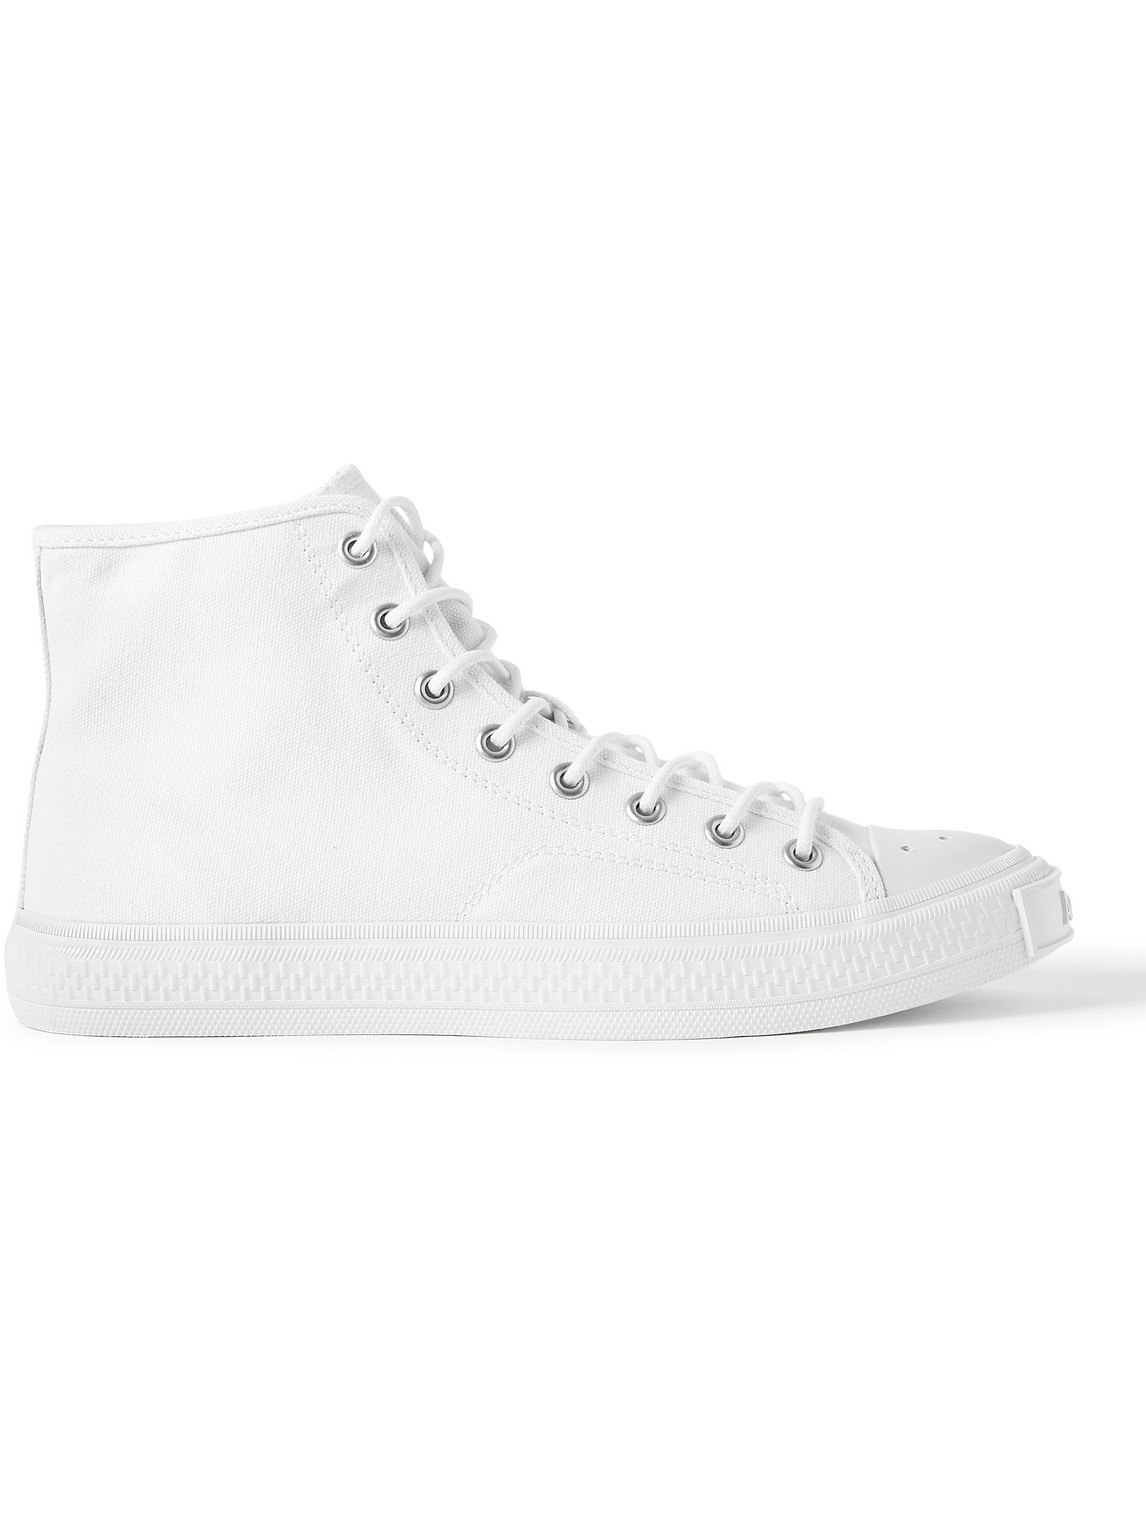 ACNE STUDIOS RUBBER-TRIMMED CANVAS HIGH-TOP SNEAKERS